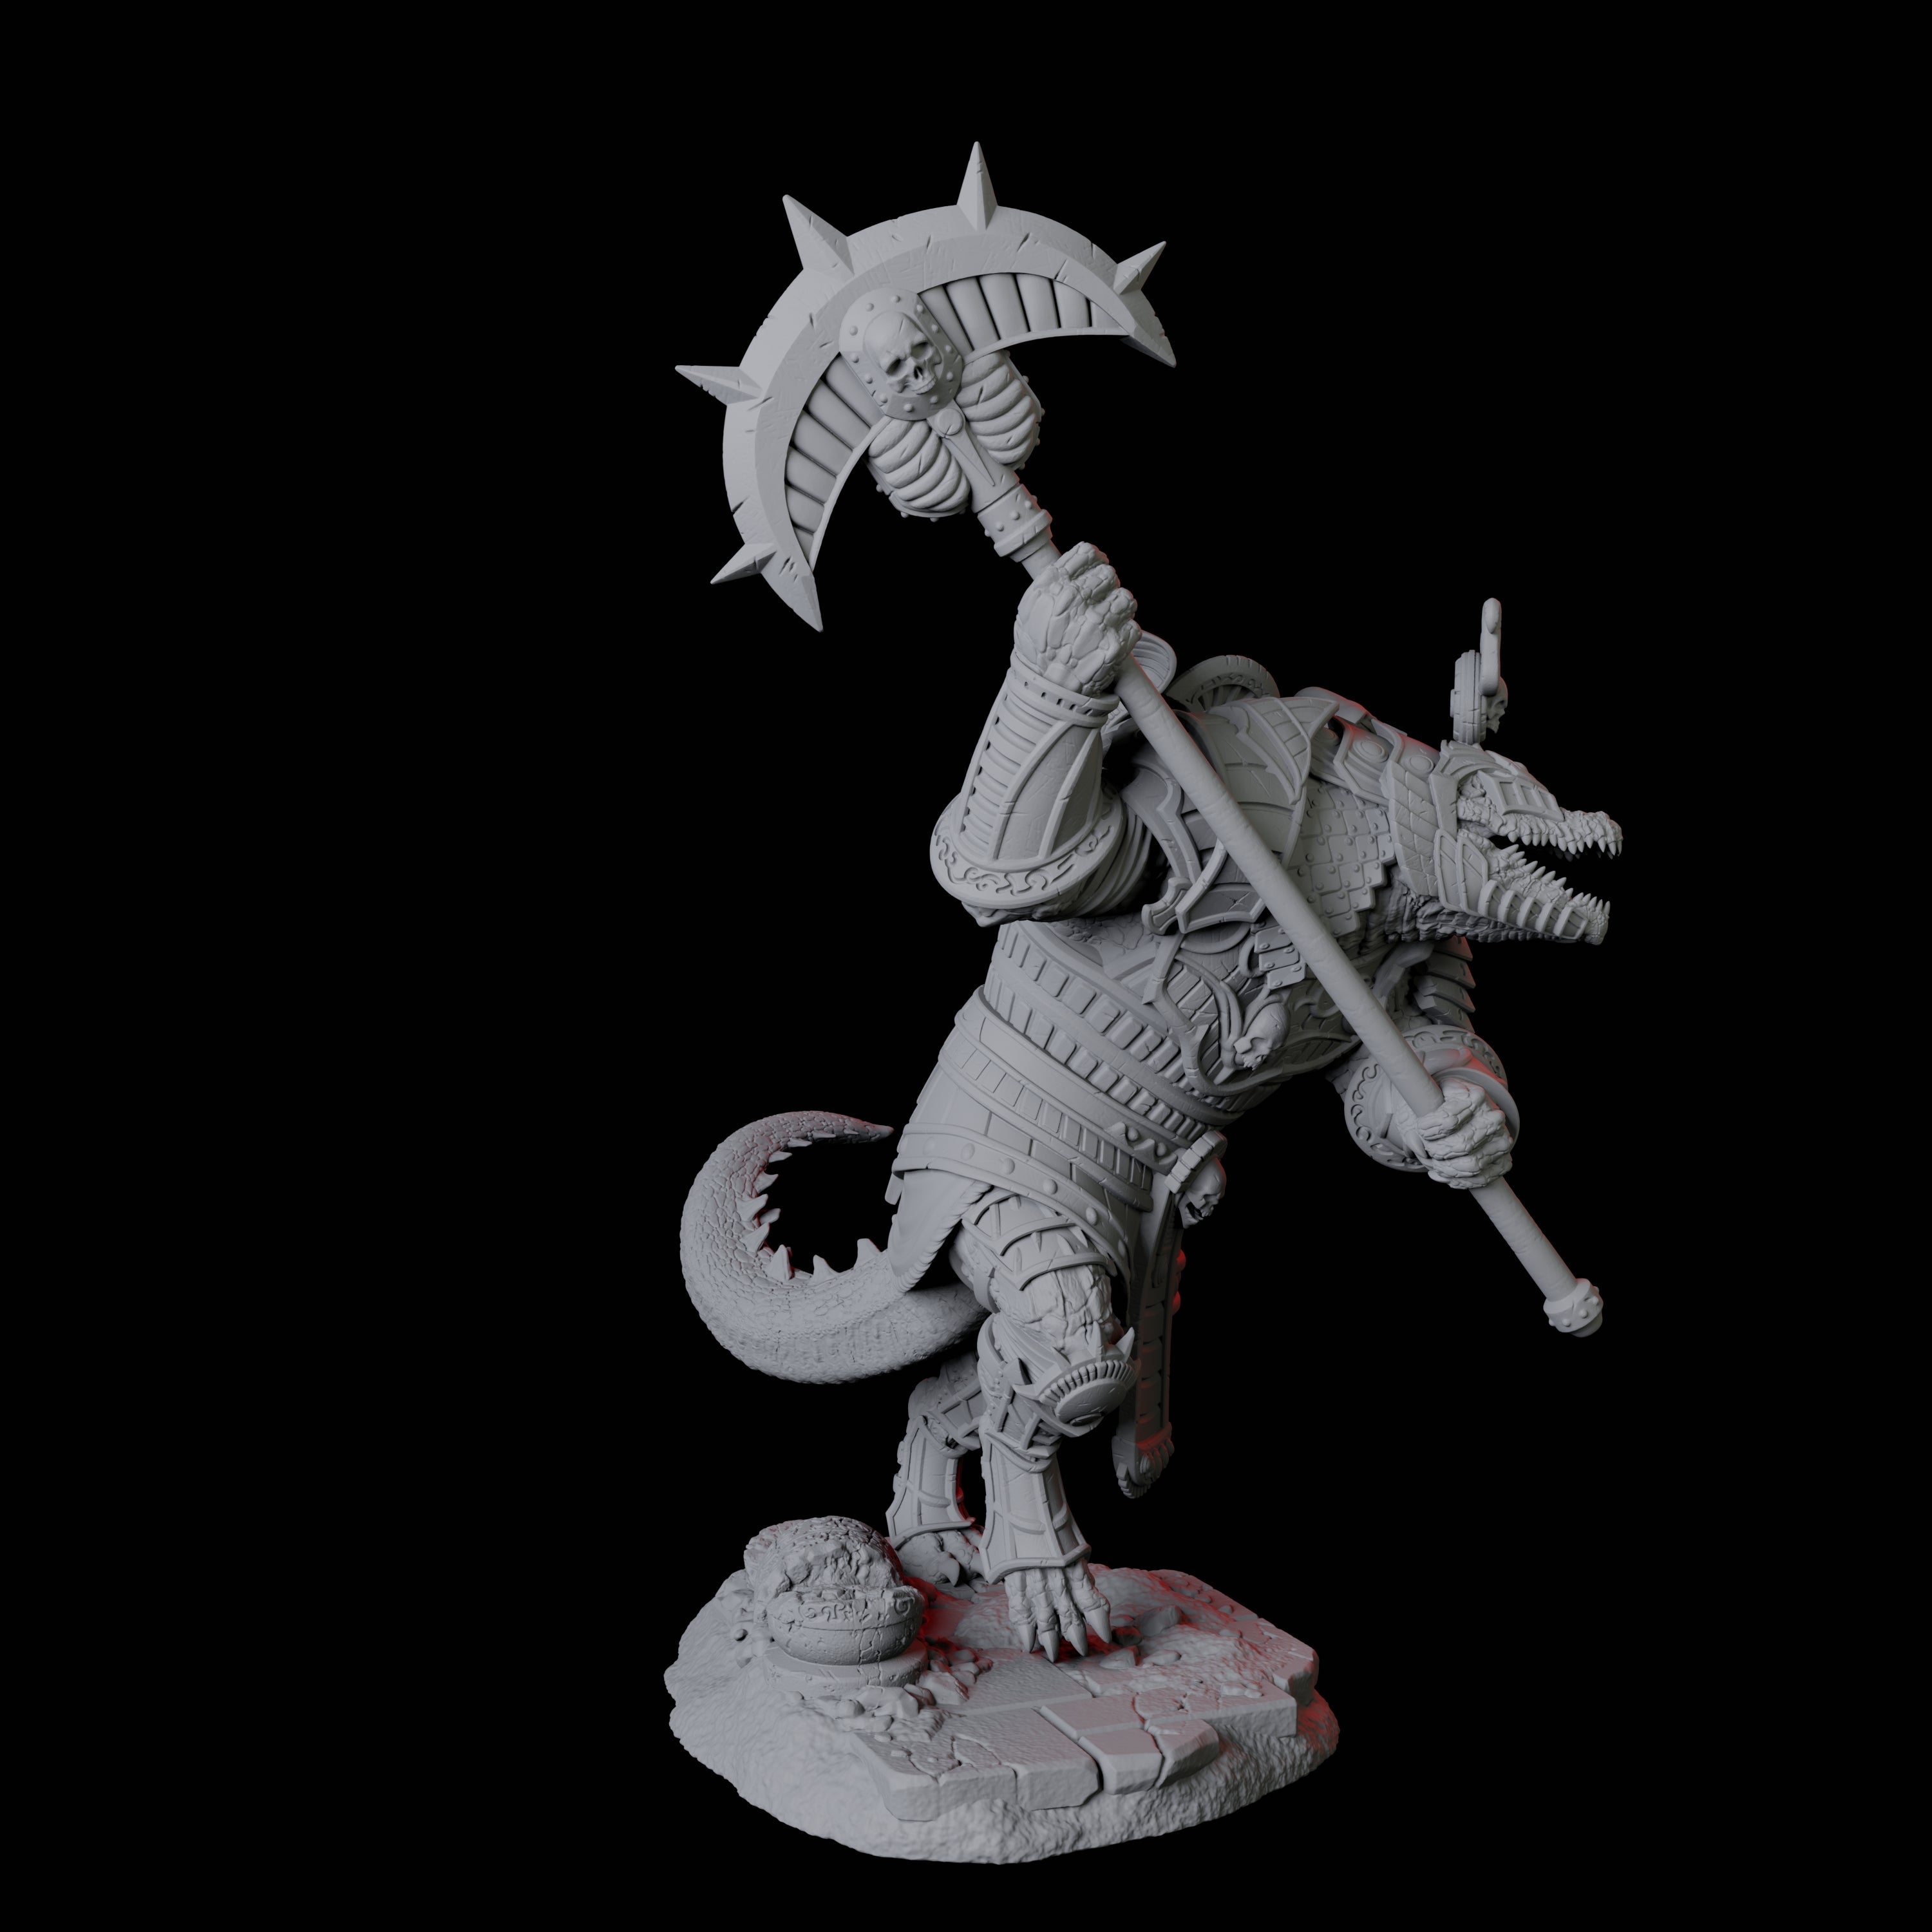 Charging Crocodile Lizardfolk Soldier C Miniature for Dungeons and Dragons, Pathfinder or other TTRPGs